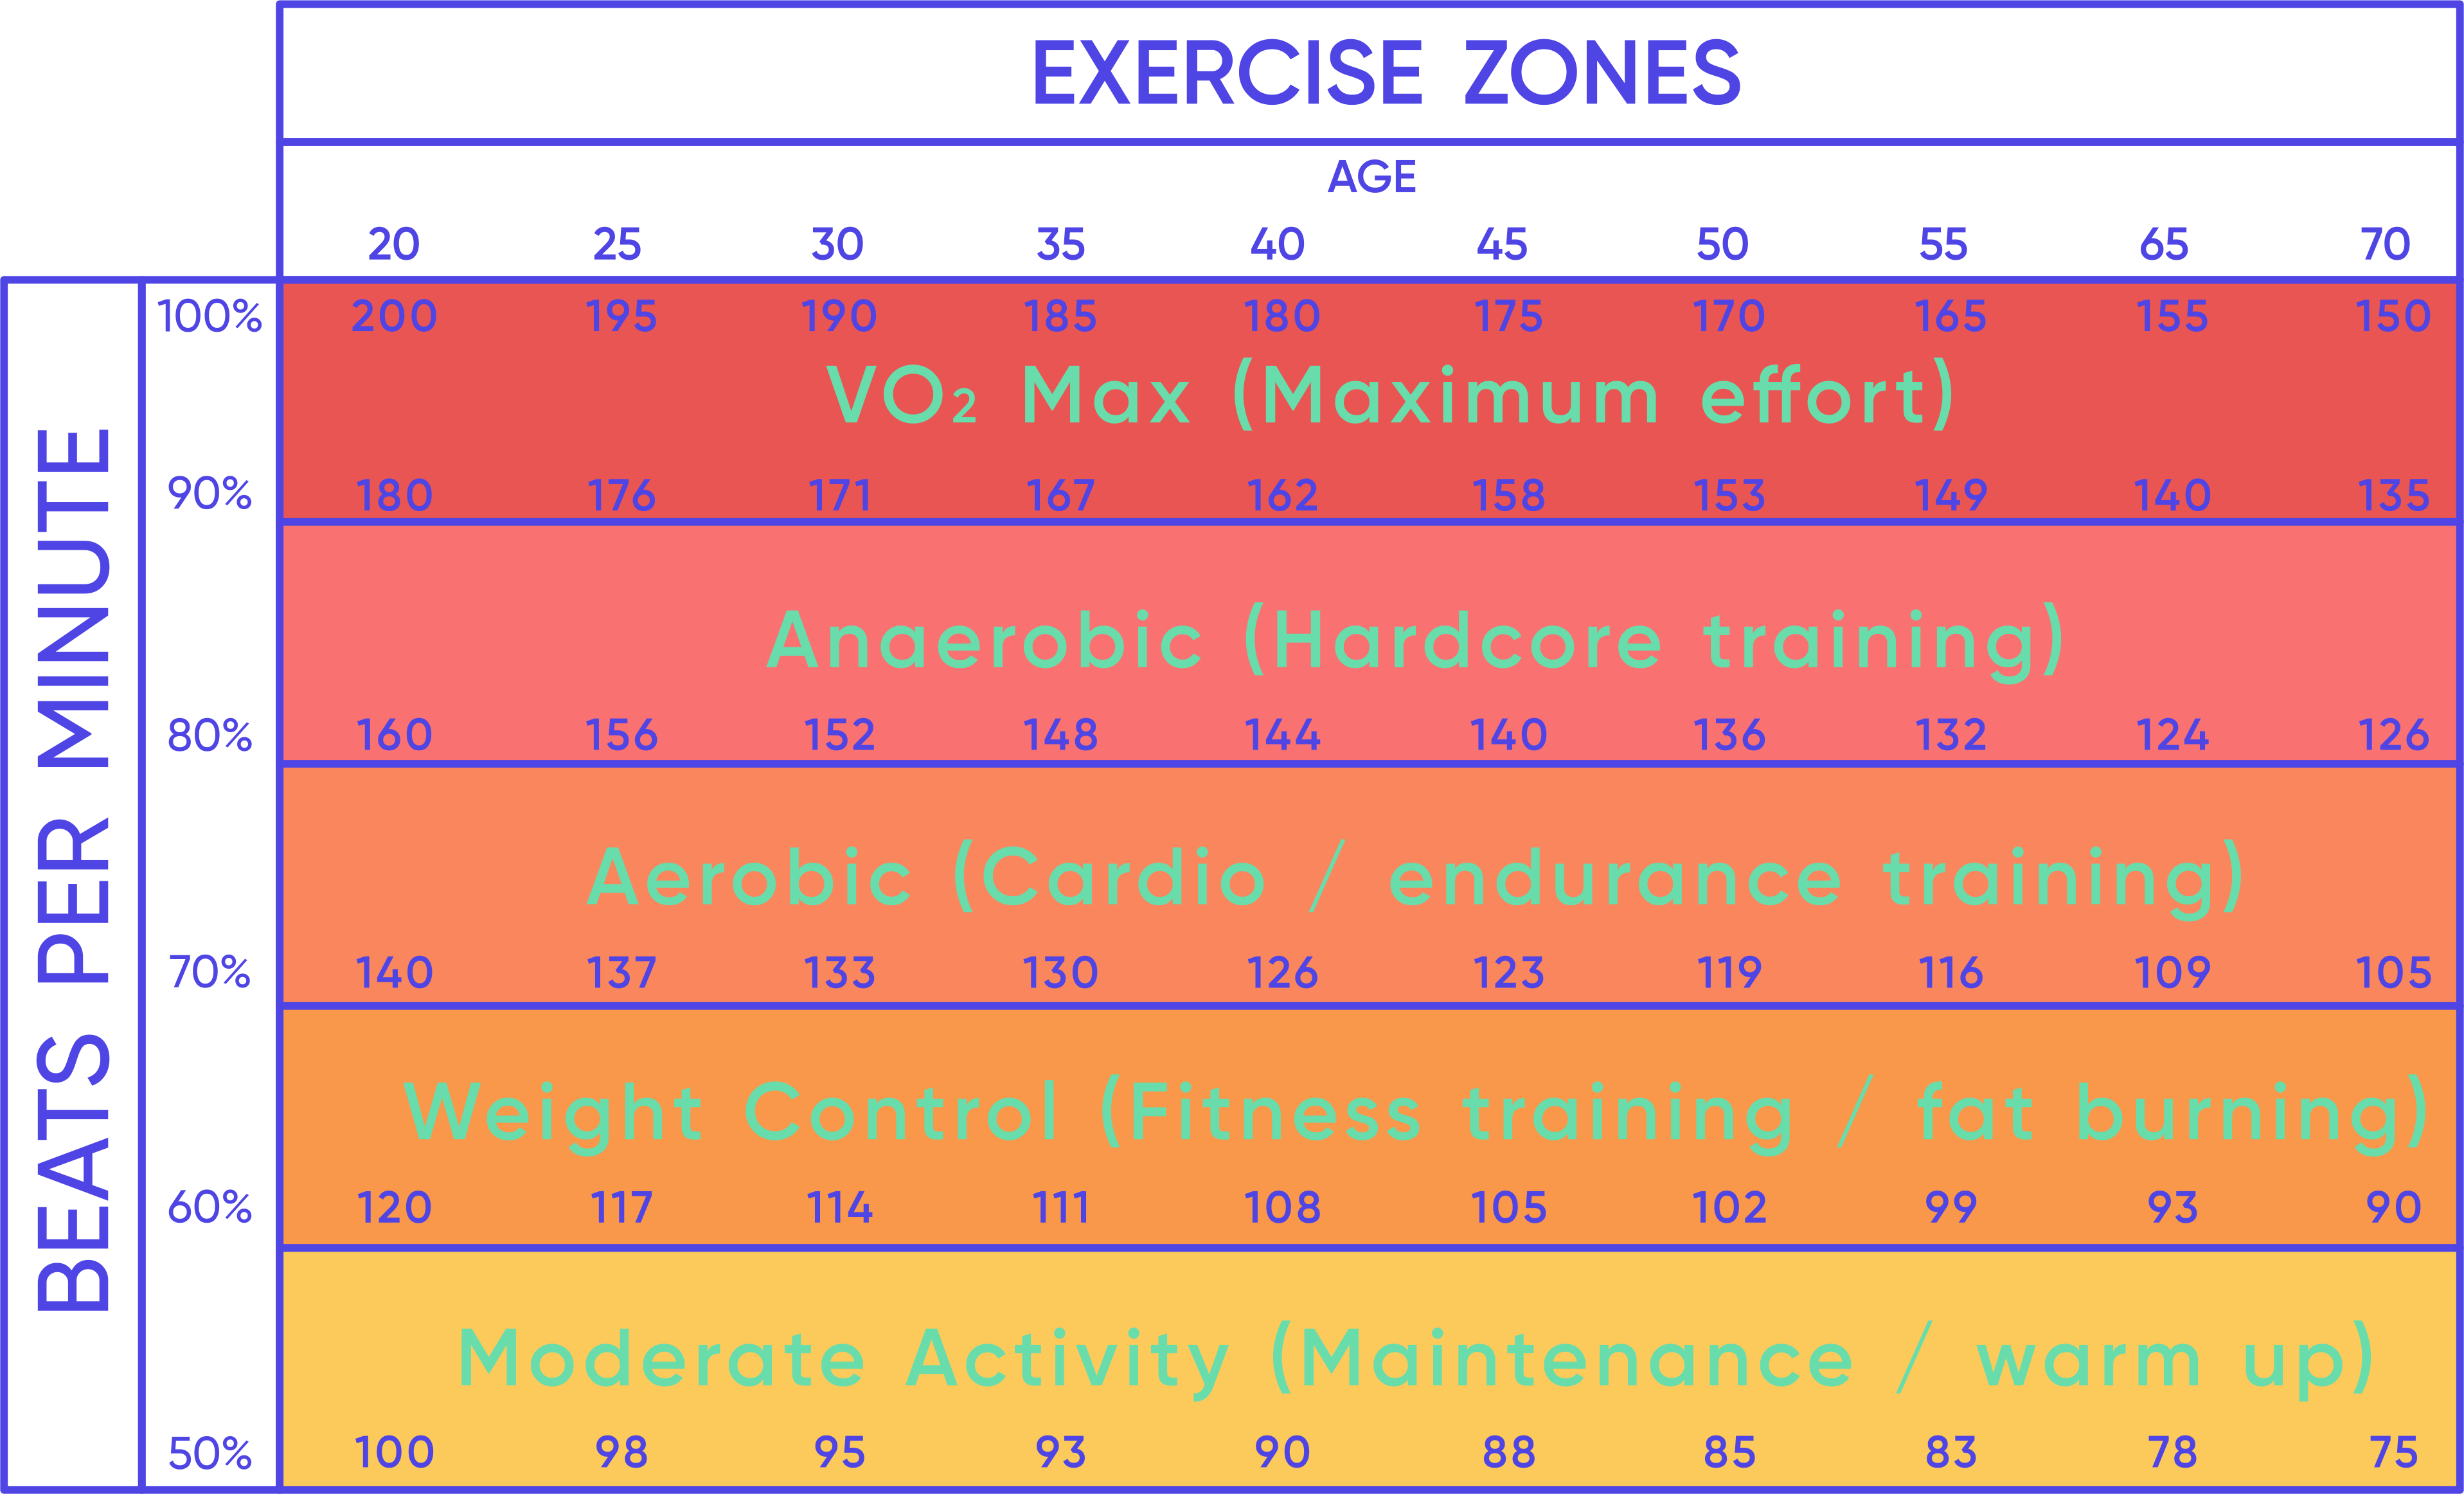 Levels of exercise intensity and the usual heart rates